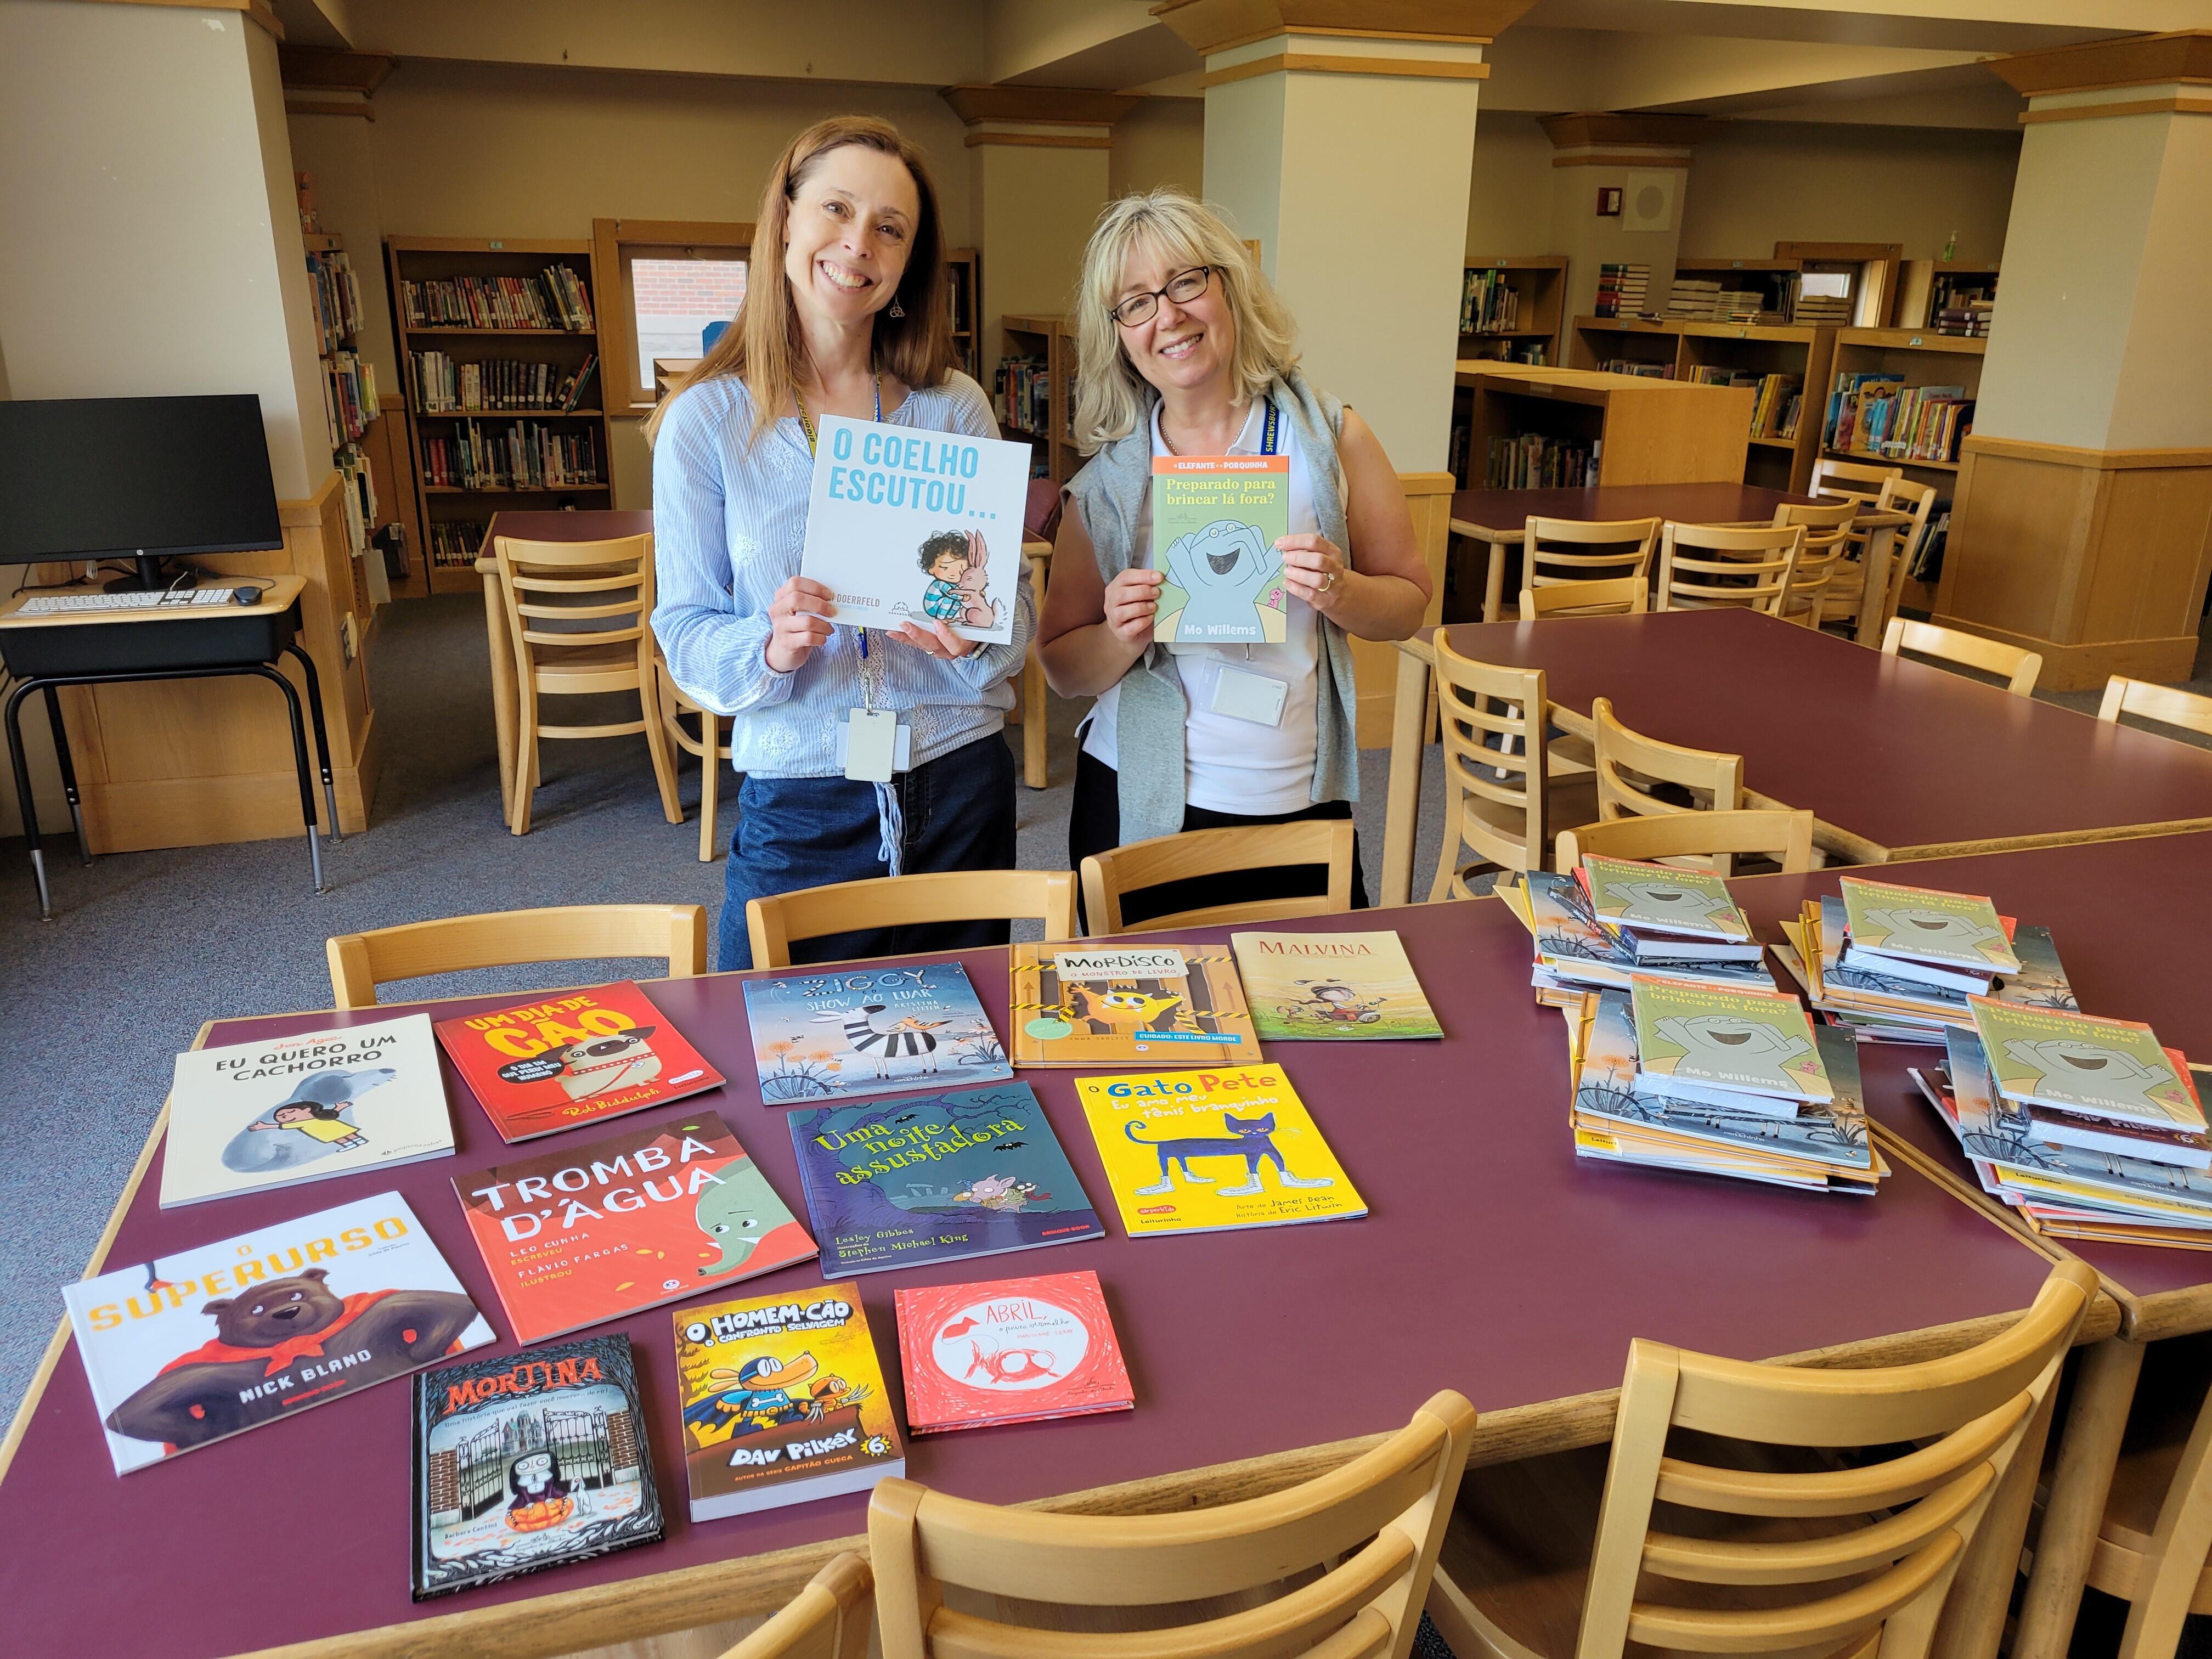 Displaying books in the media center